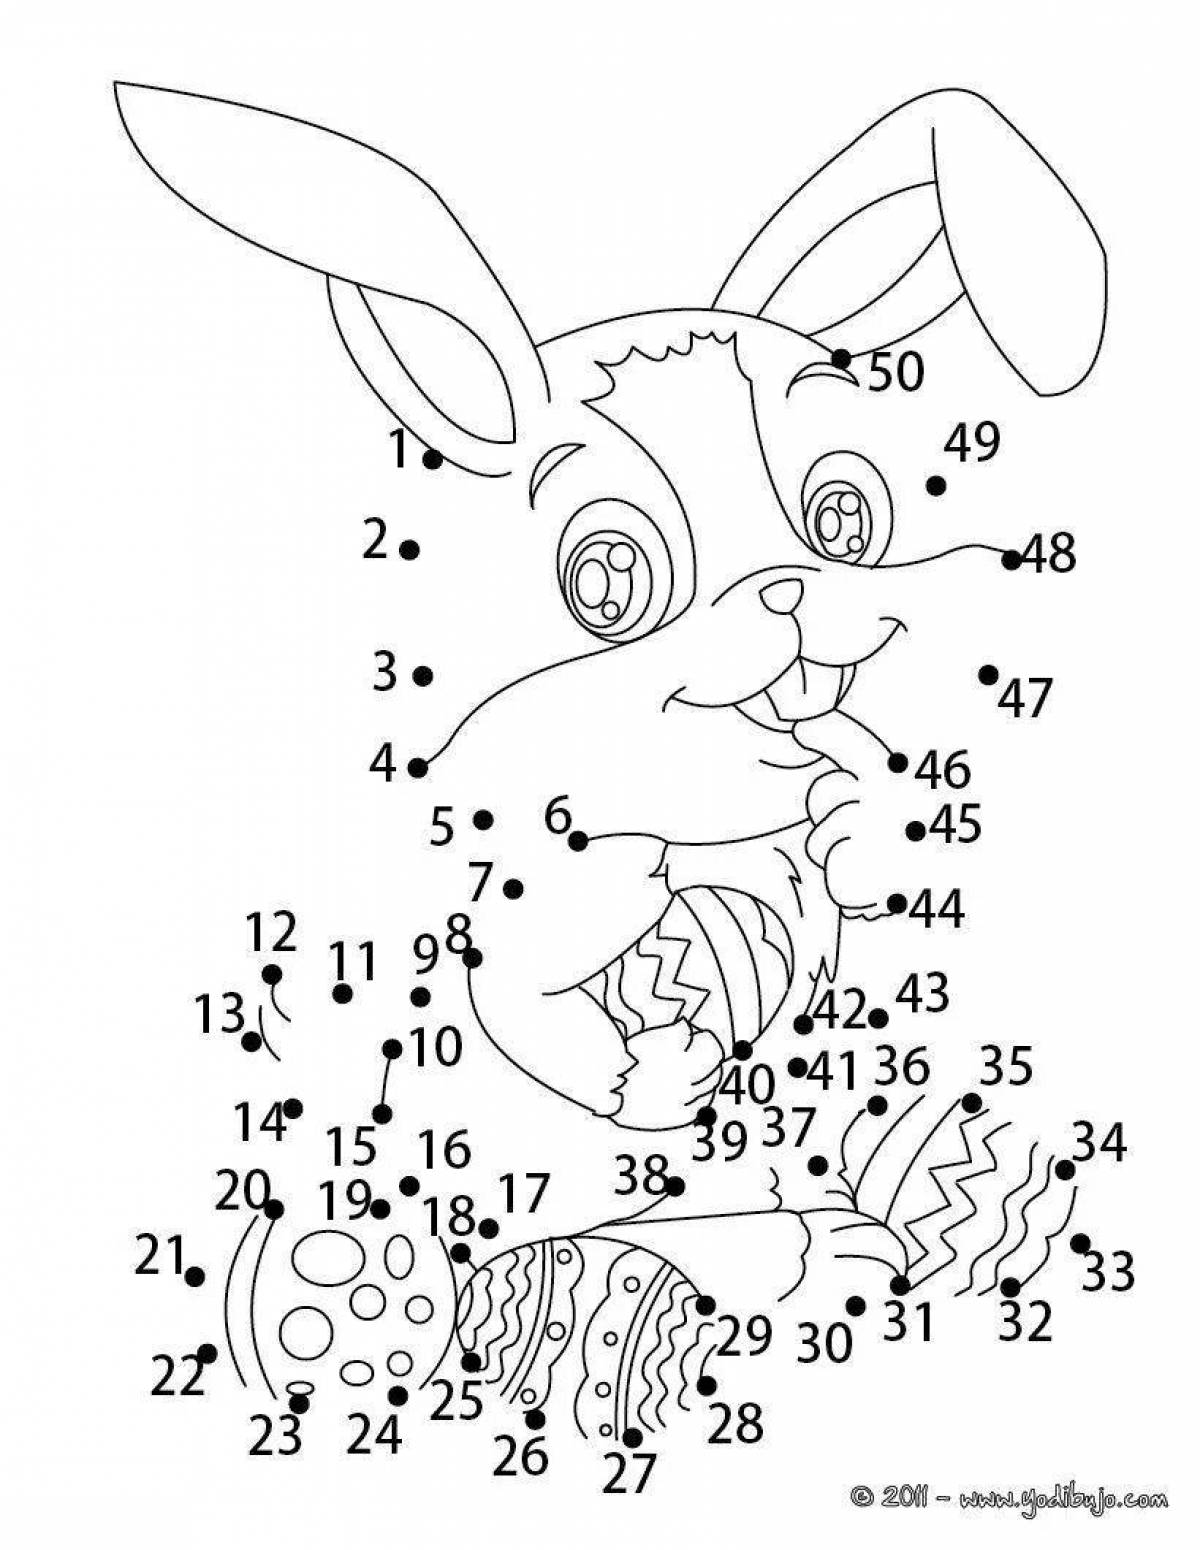 Amazing bunny by numbers coloring book